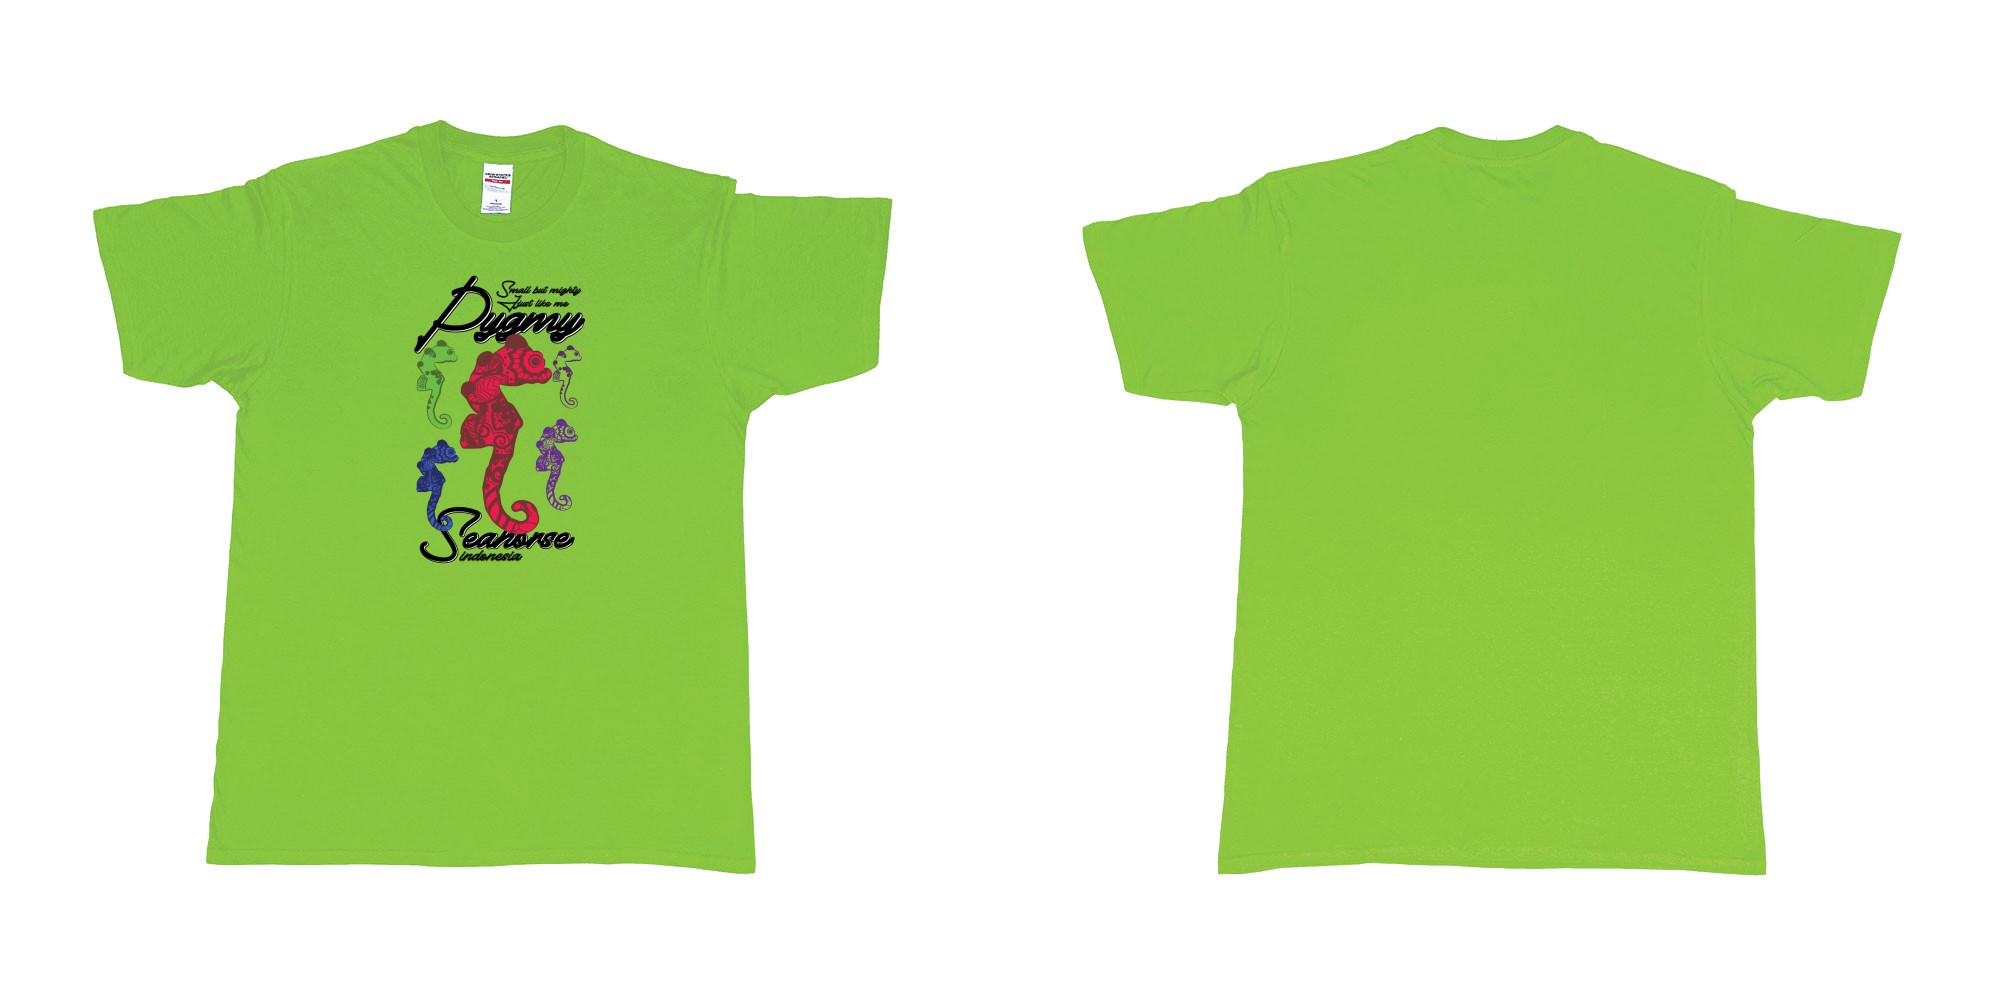 Custom tshirt design pygmy seahorse indonesia small but mighty just like me in fabric color lime choice your own text made in Bali by The Pirate Way